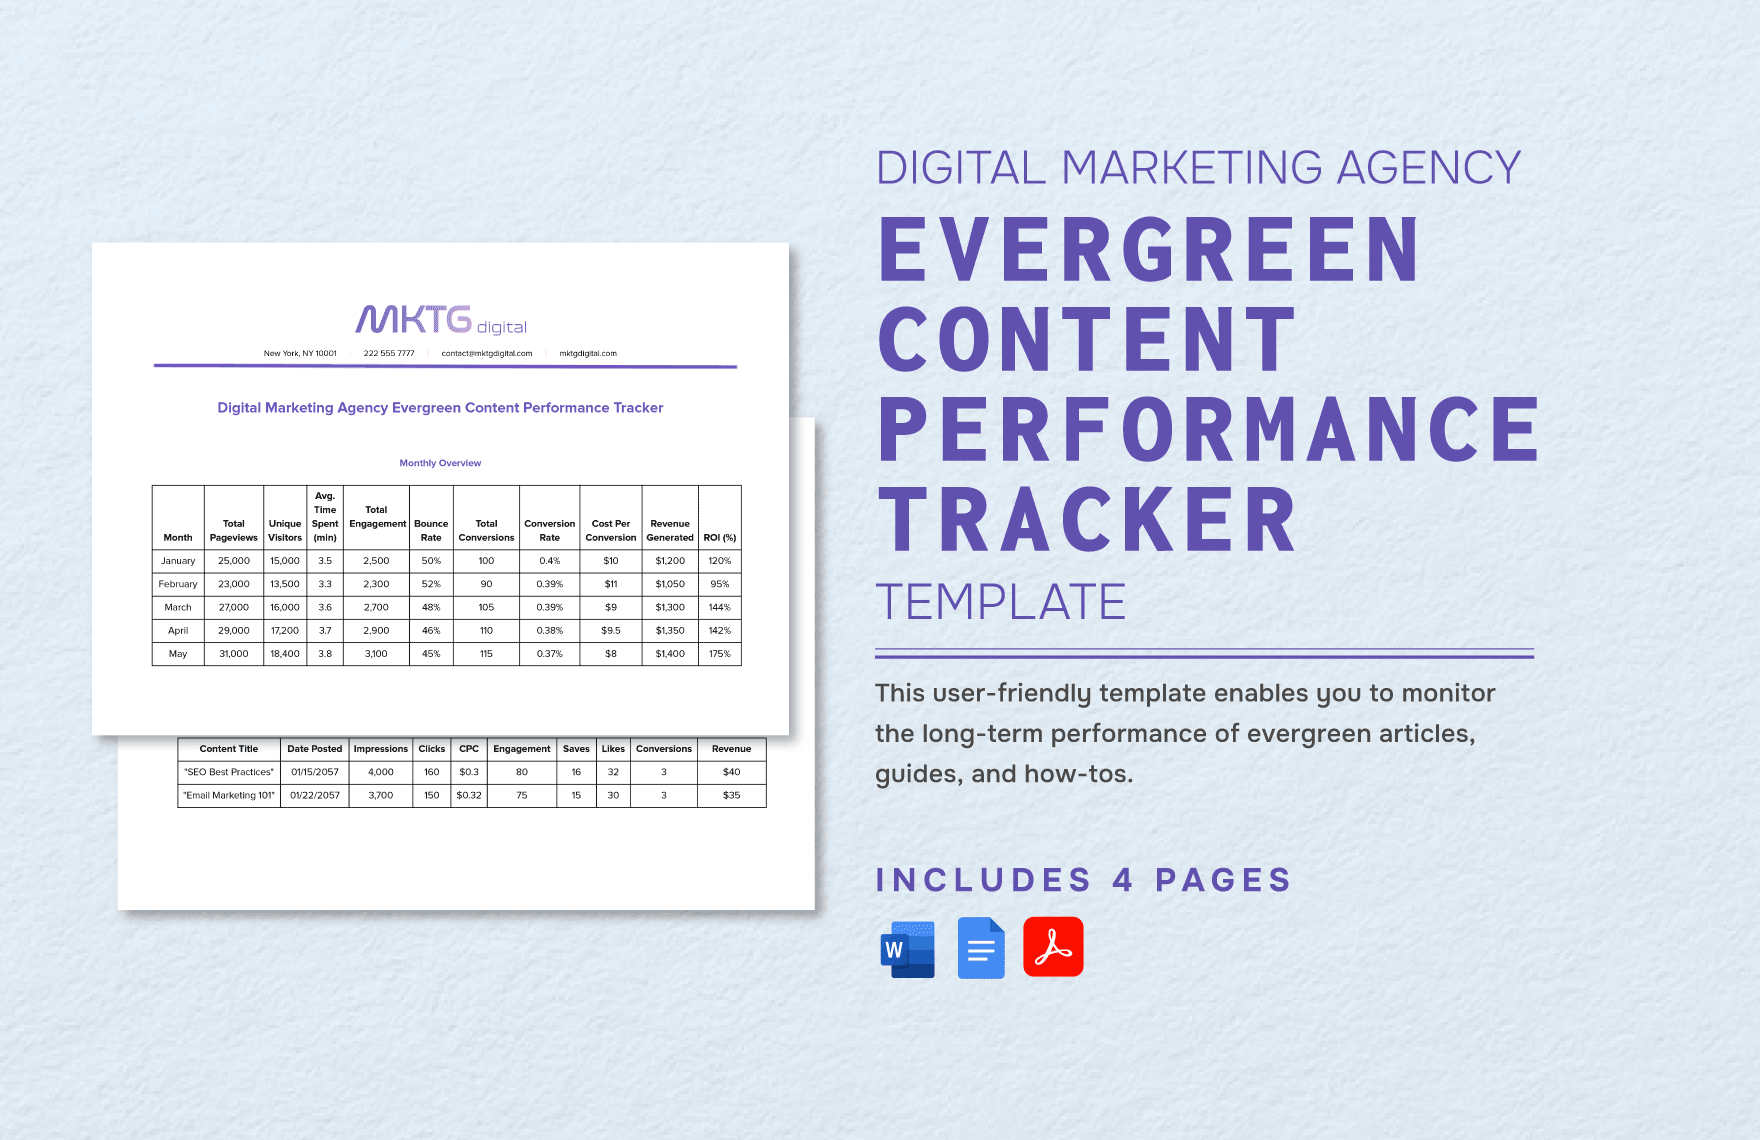 Digital Marketing Agency Evergreen Content Performance Tracker Template in Word, Google Docs, PDF